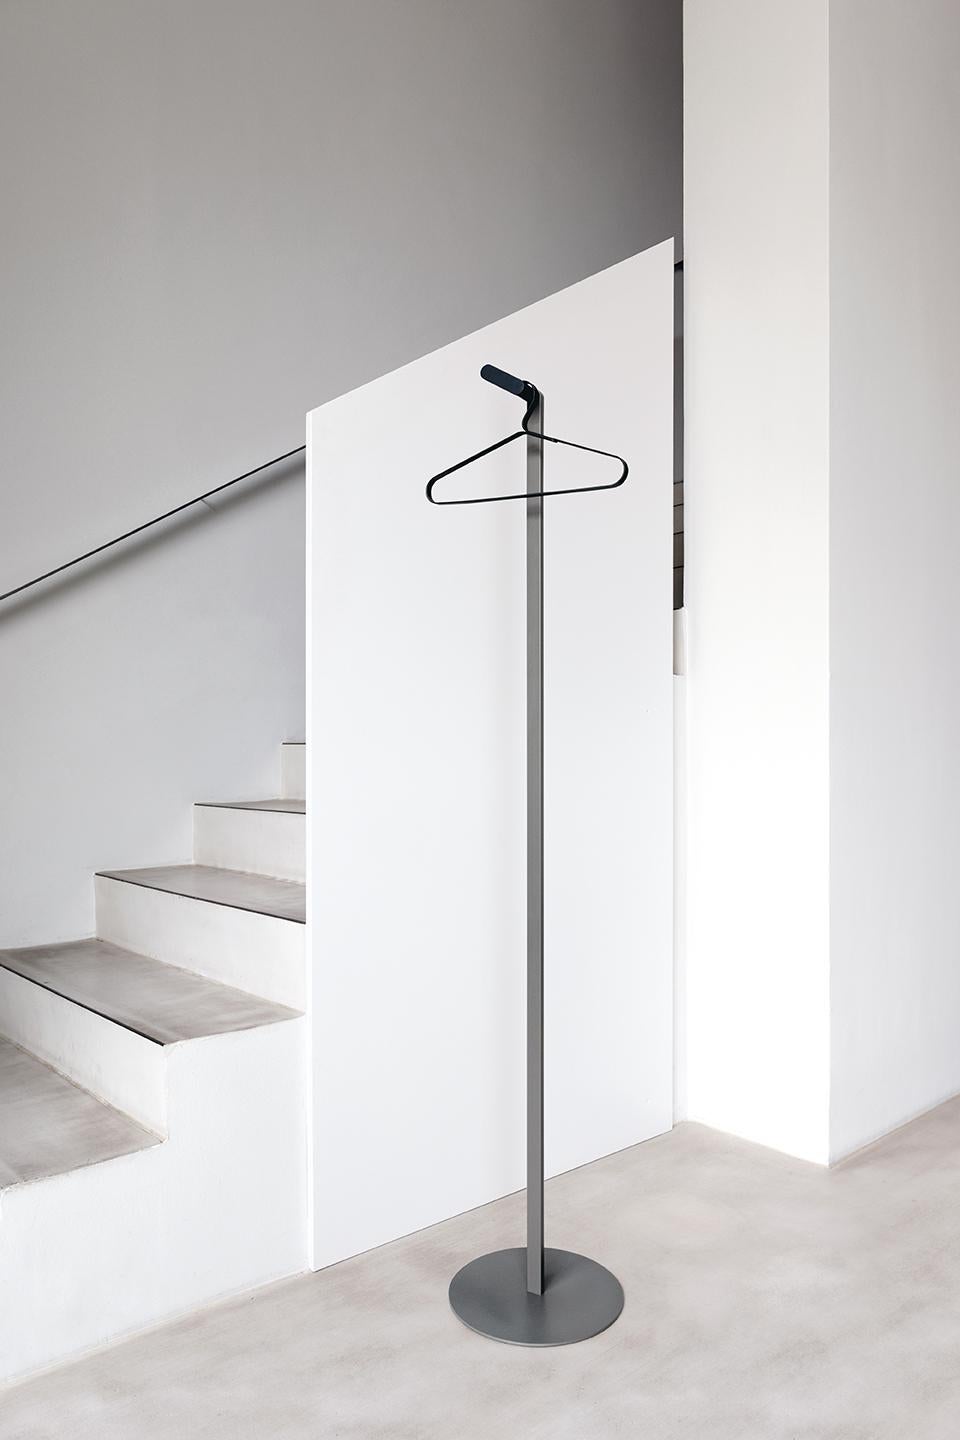 In powder-coated steel, hooks in .198 black finely structured powder-coated finish
holds up to 10kg when evenly distributed.
Designed for perfection. The left coat stand is an especially space-saving solution. Made of metal, it is topped with a